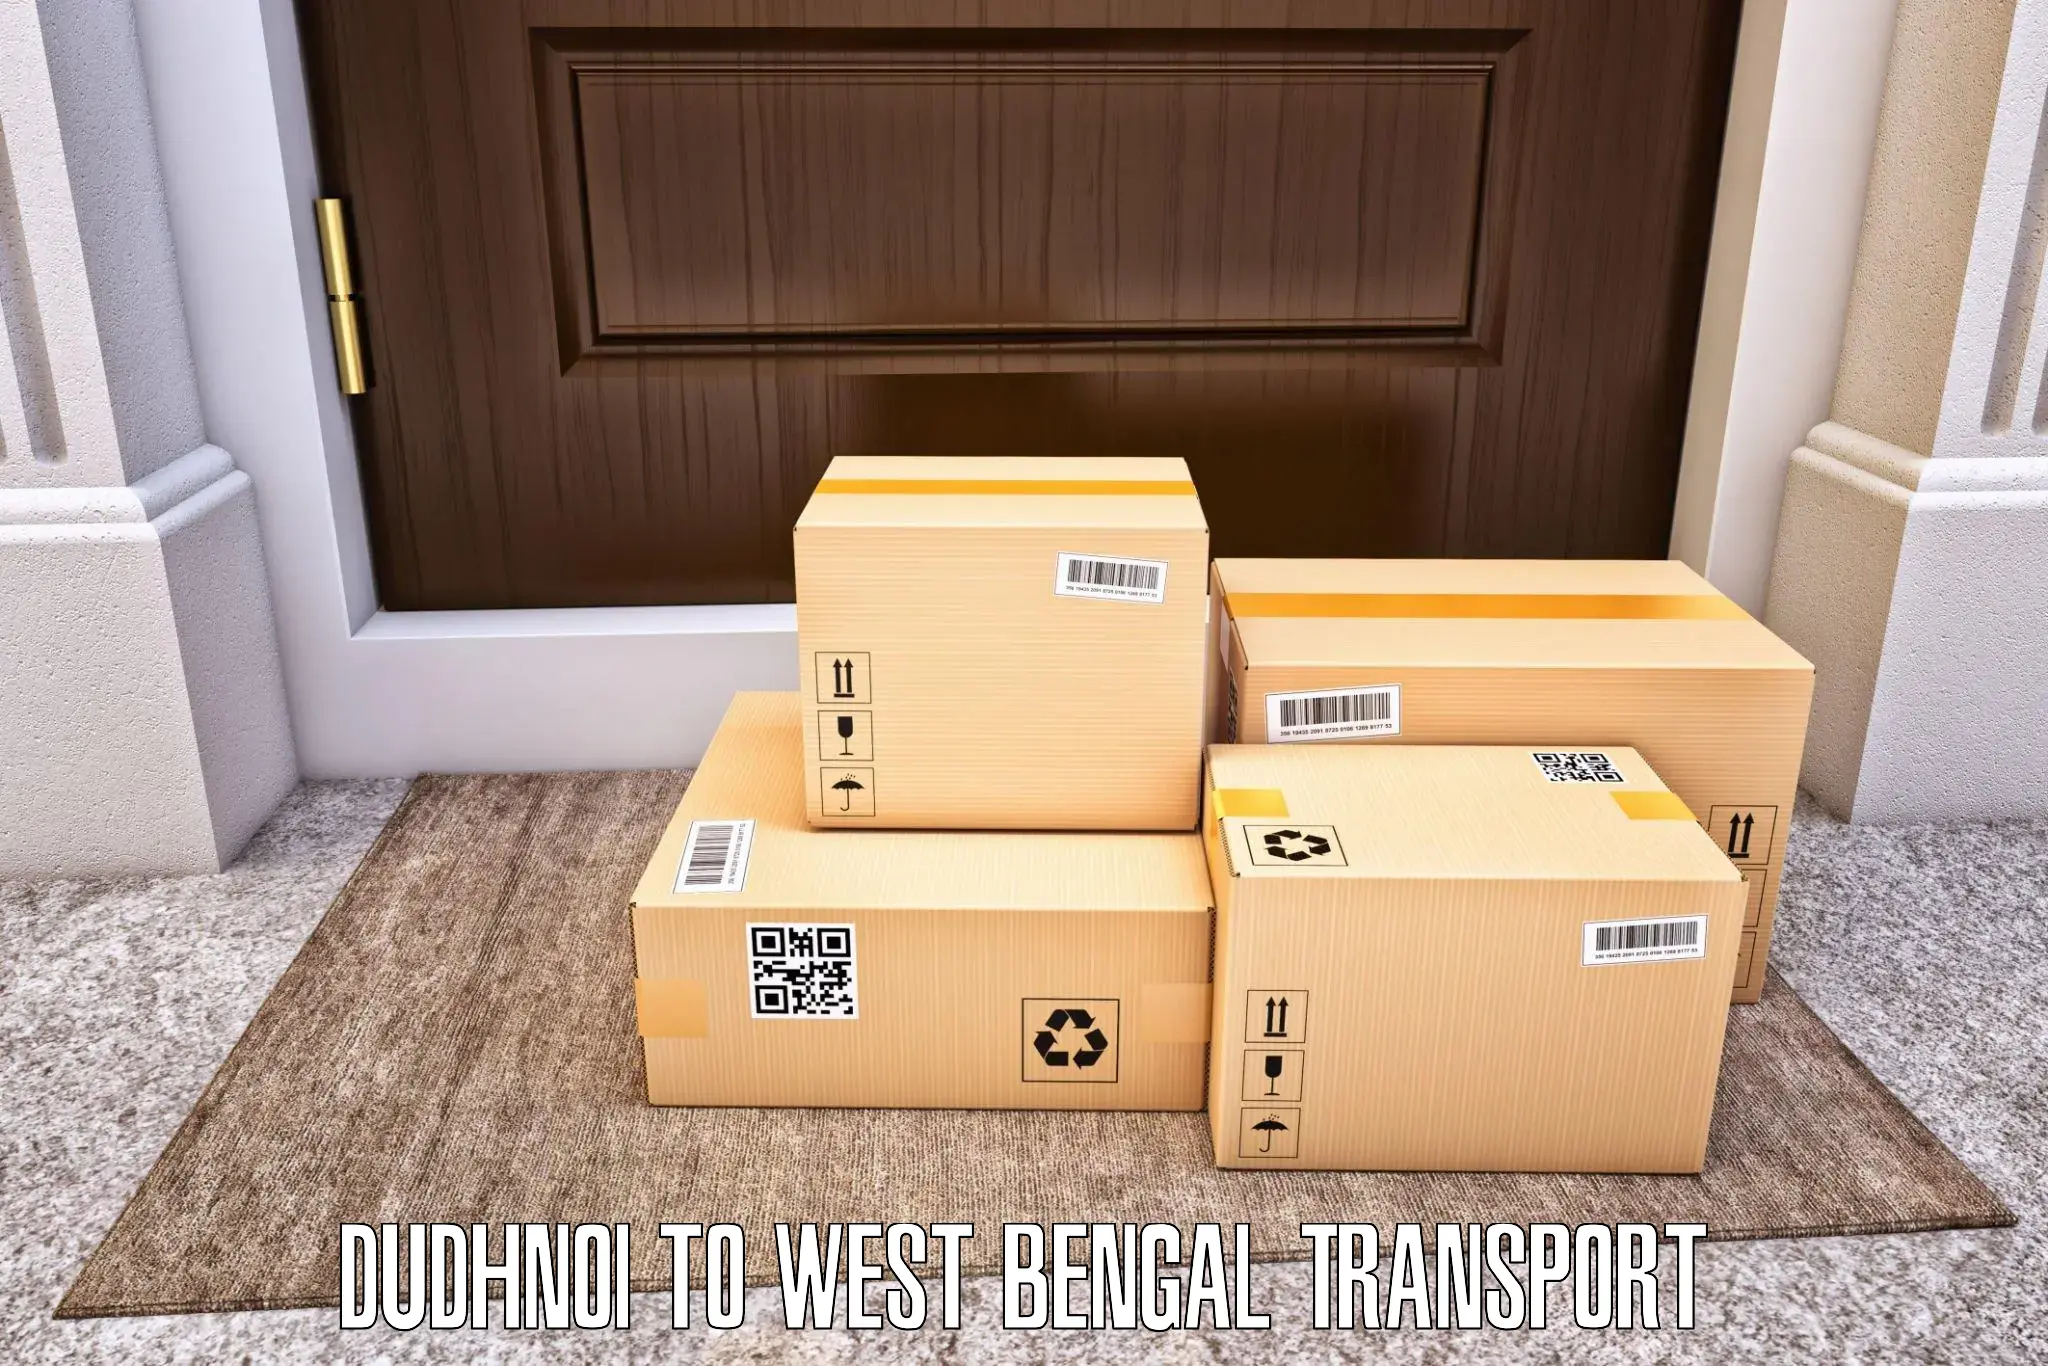 Commercial transport service Dudhnoi to Sitai